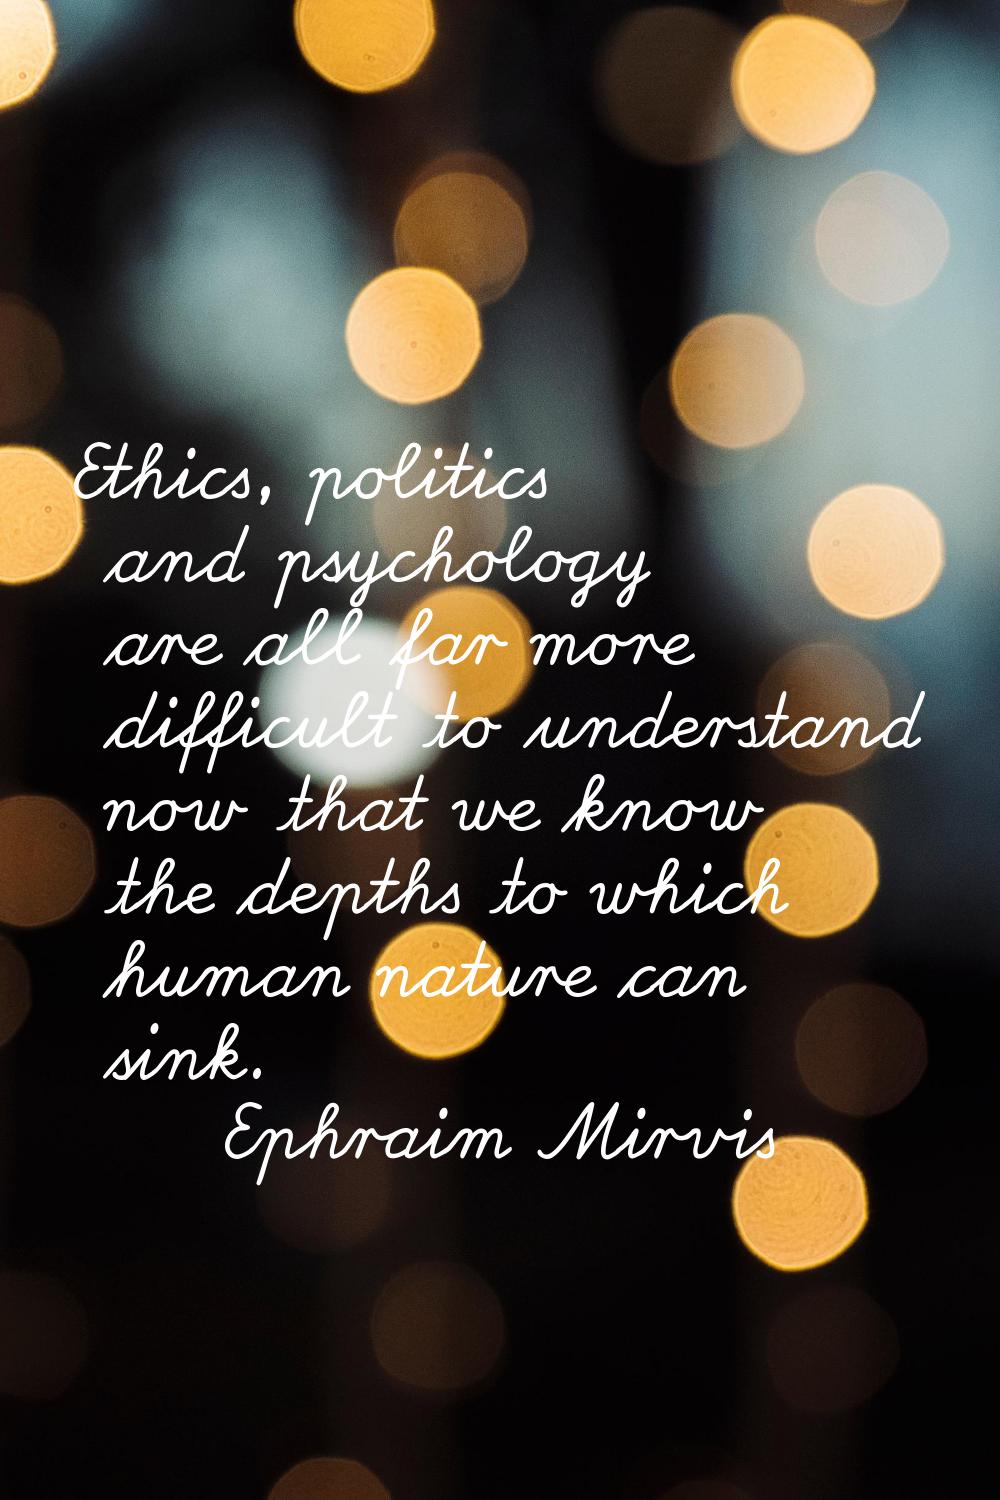 Ethics, politics and psychology are all far more difficult to understand now that we know the depth